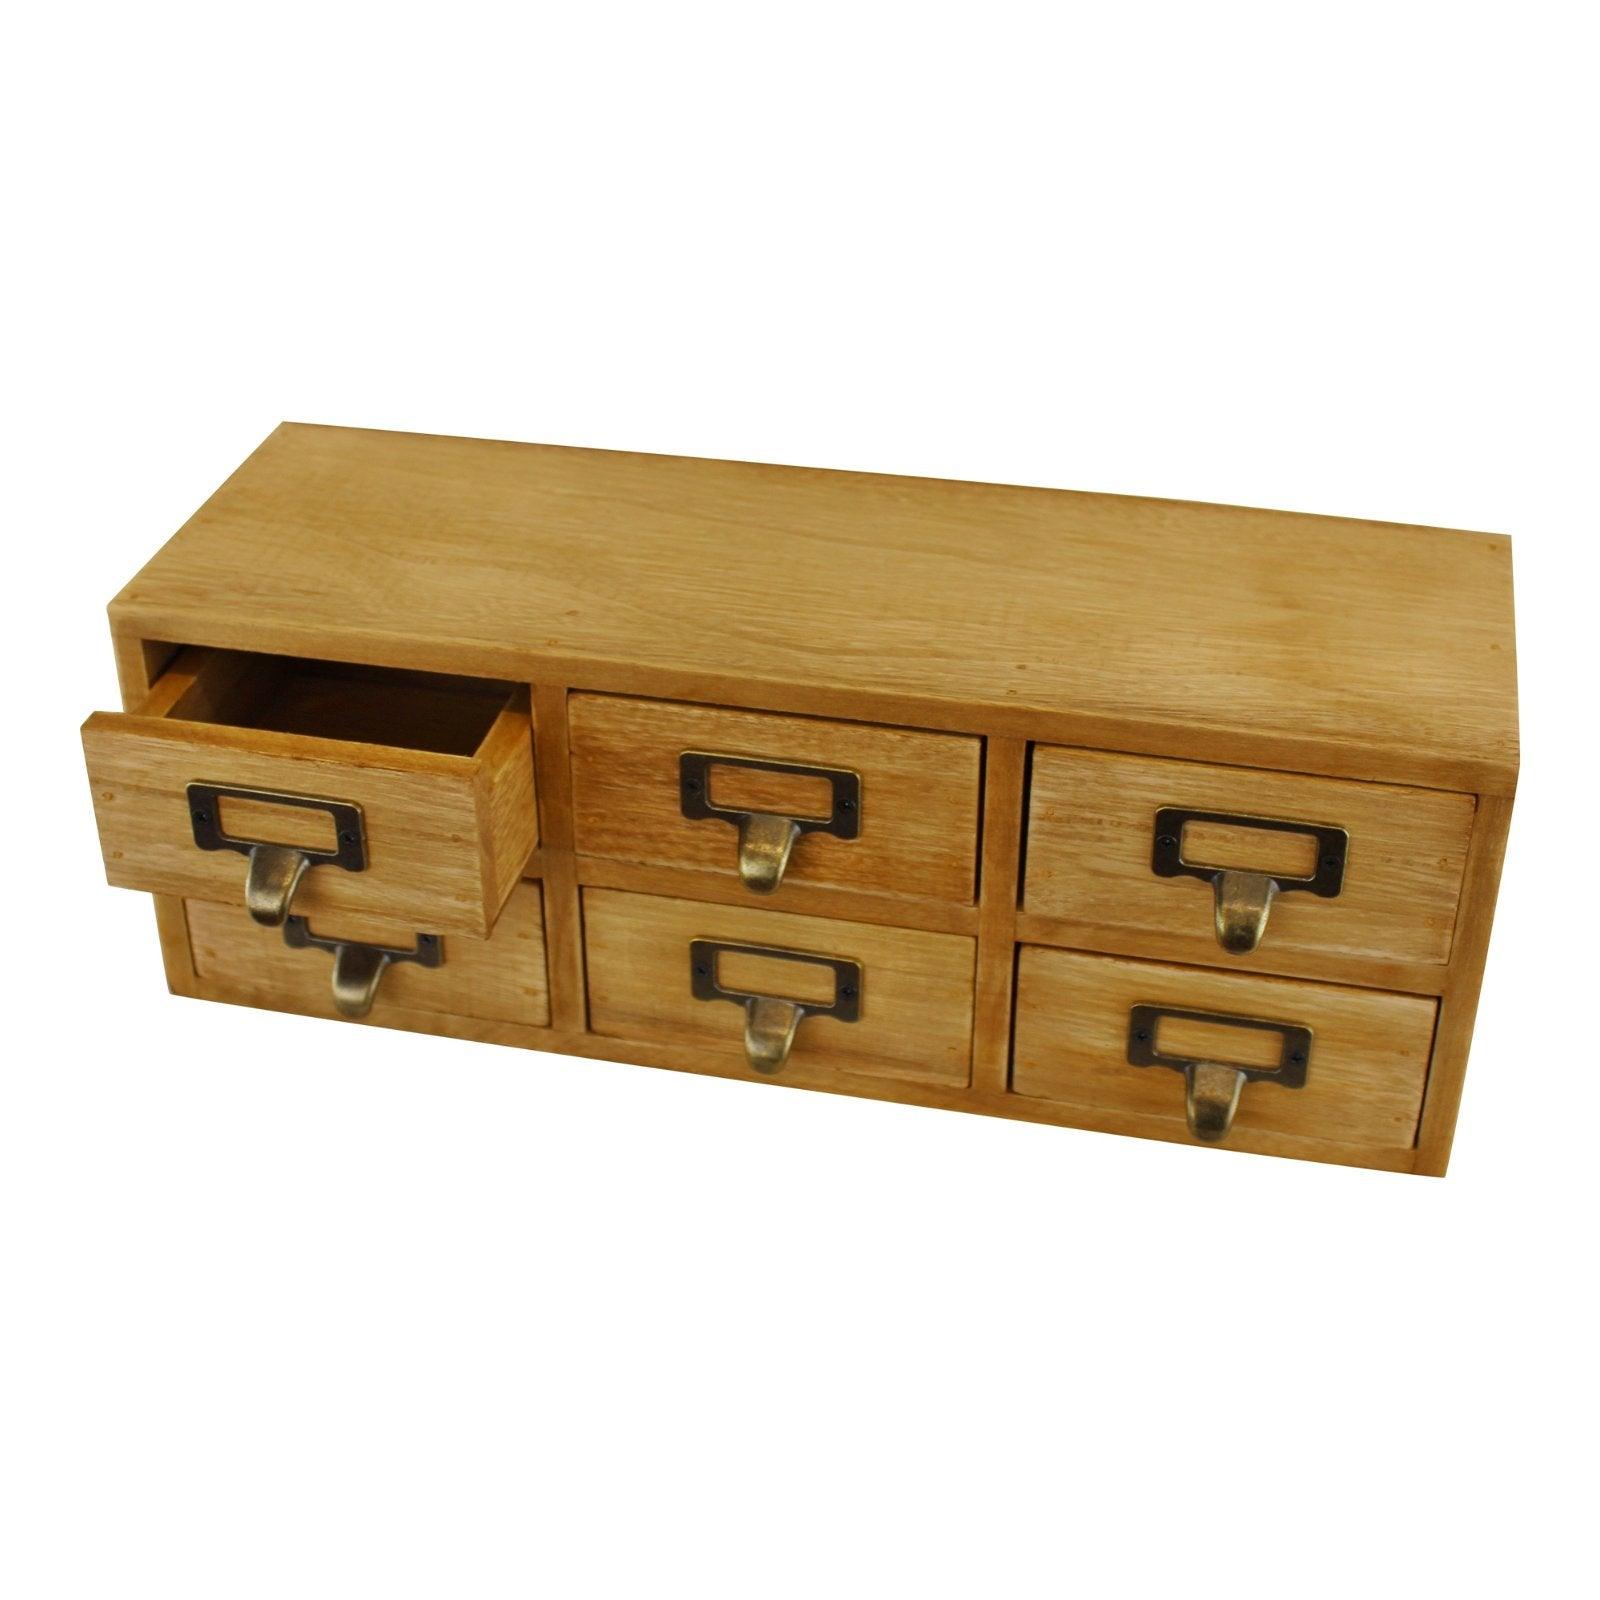 View 6 Drawer Double Level Small Storage Unit Trinket Drawers information